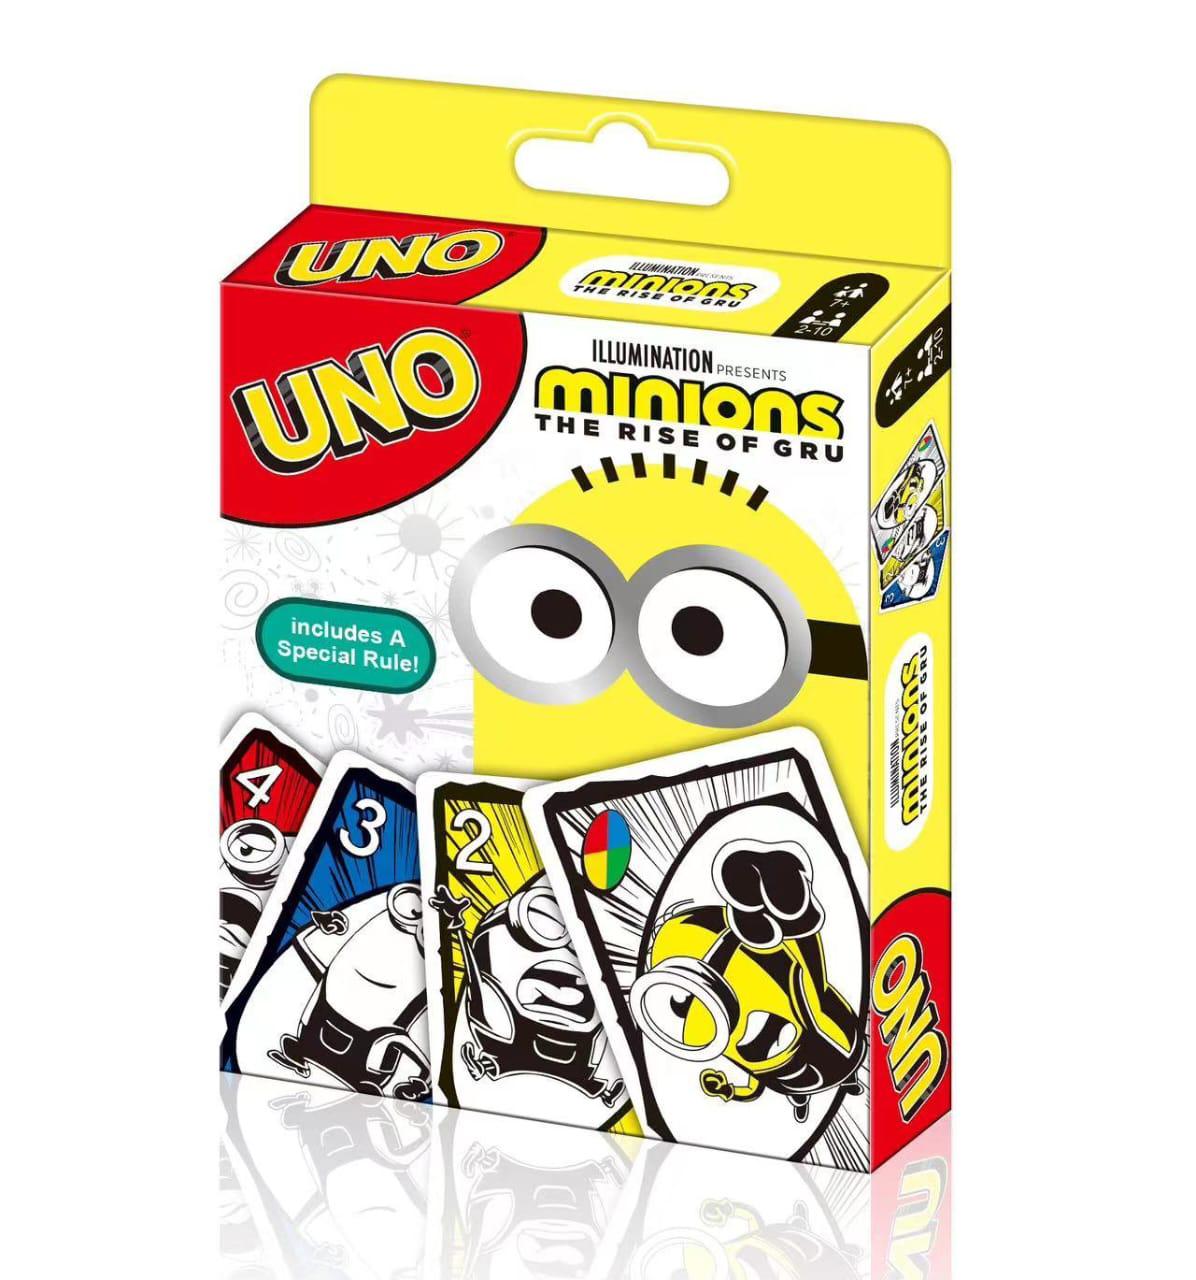 New UNO Card Game